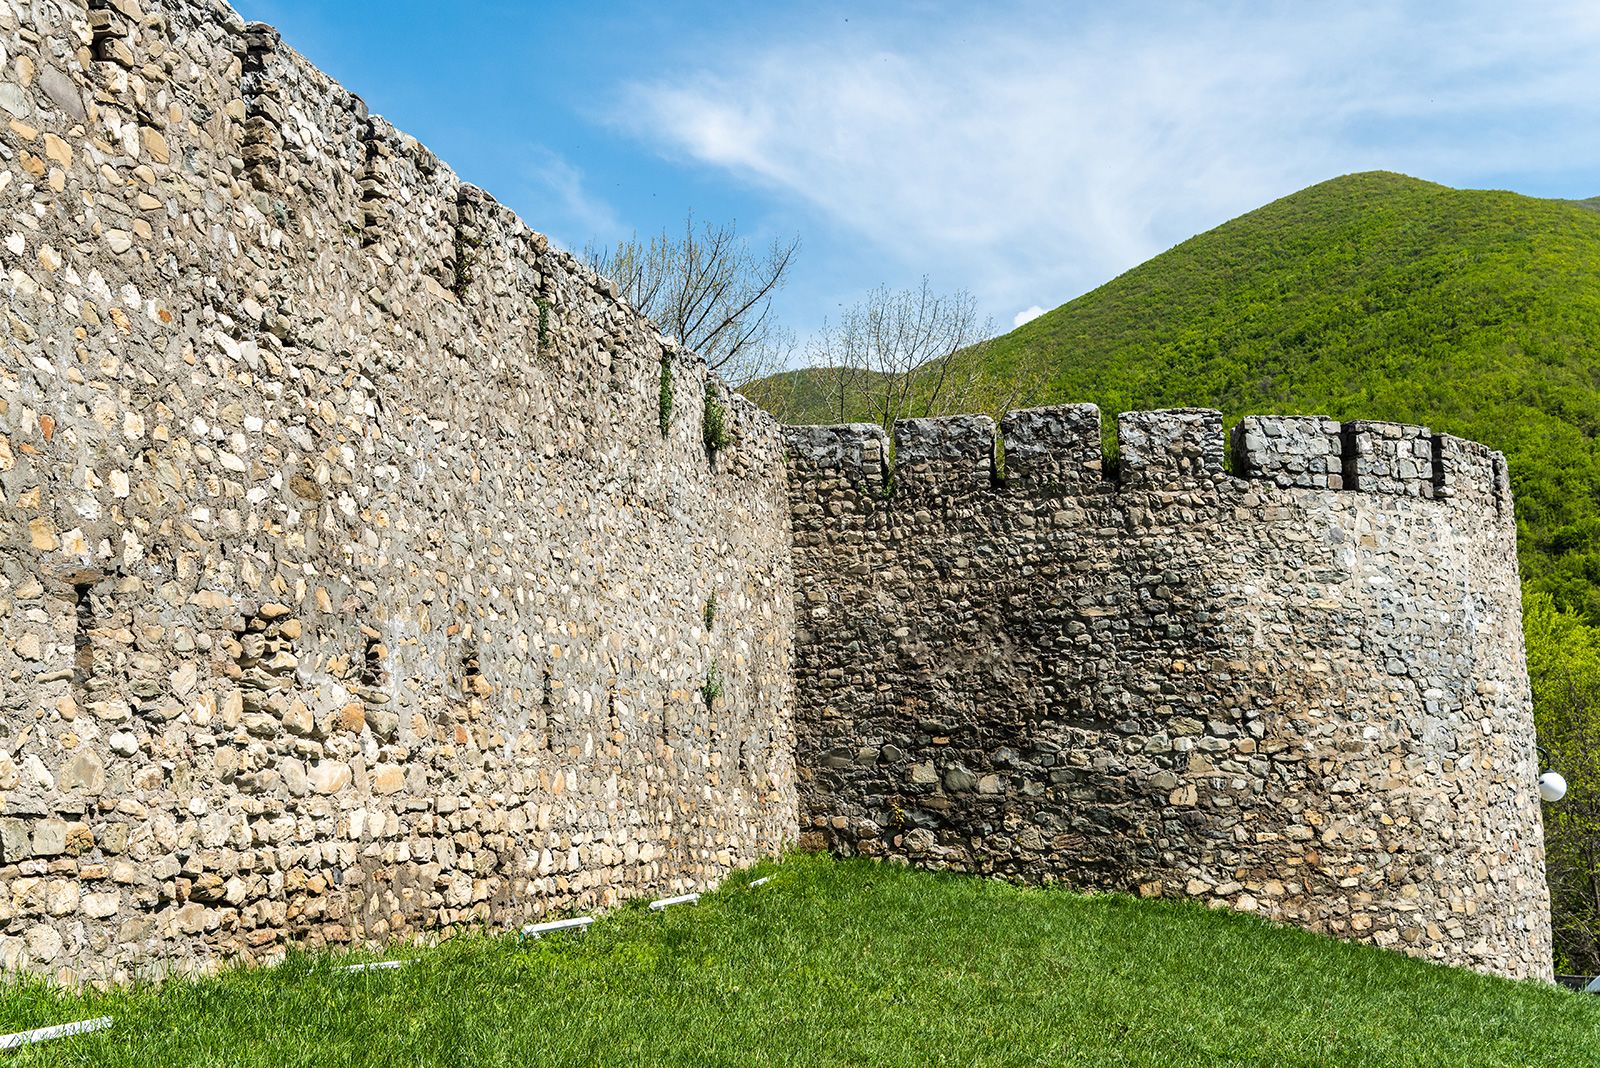 Azerbaijan's 10 best castles and fortresses